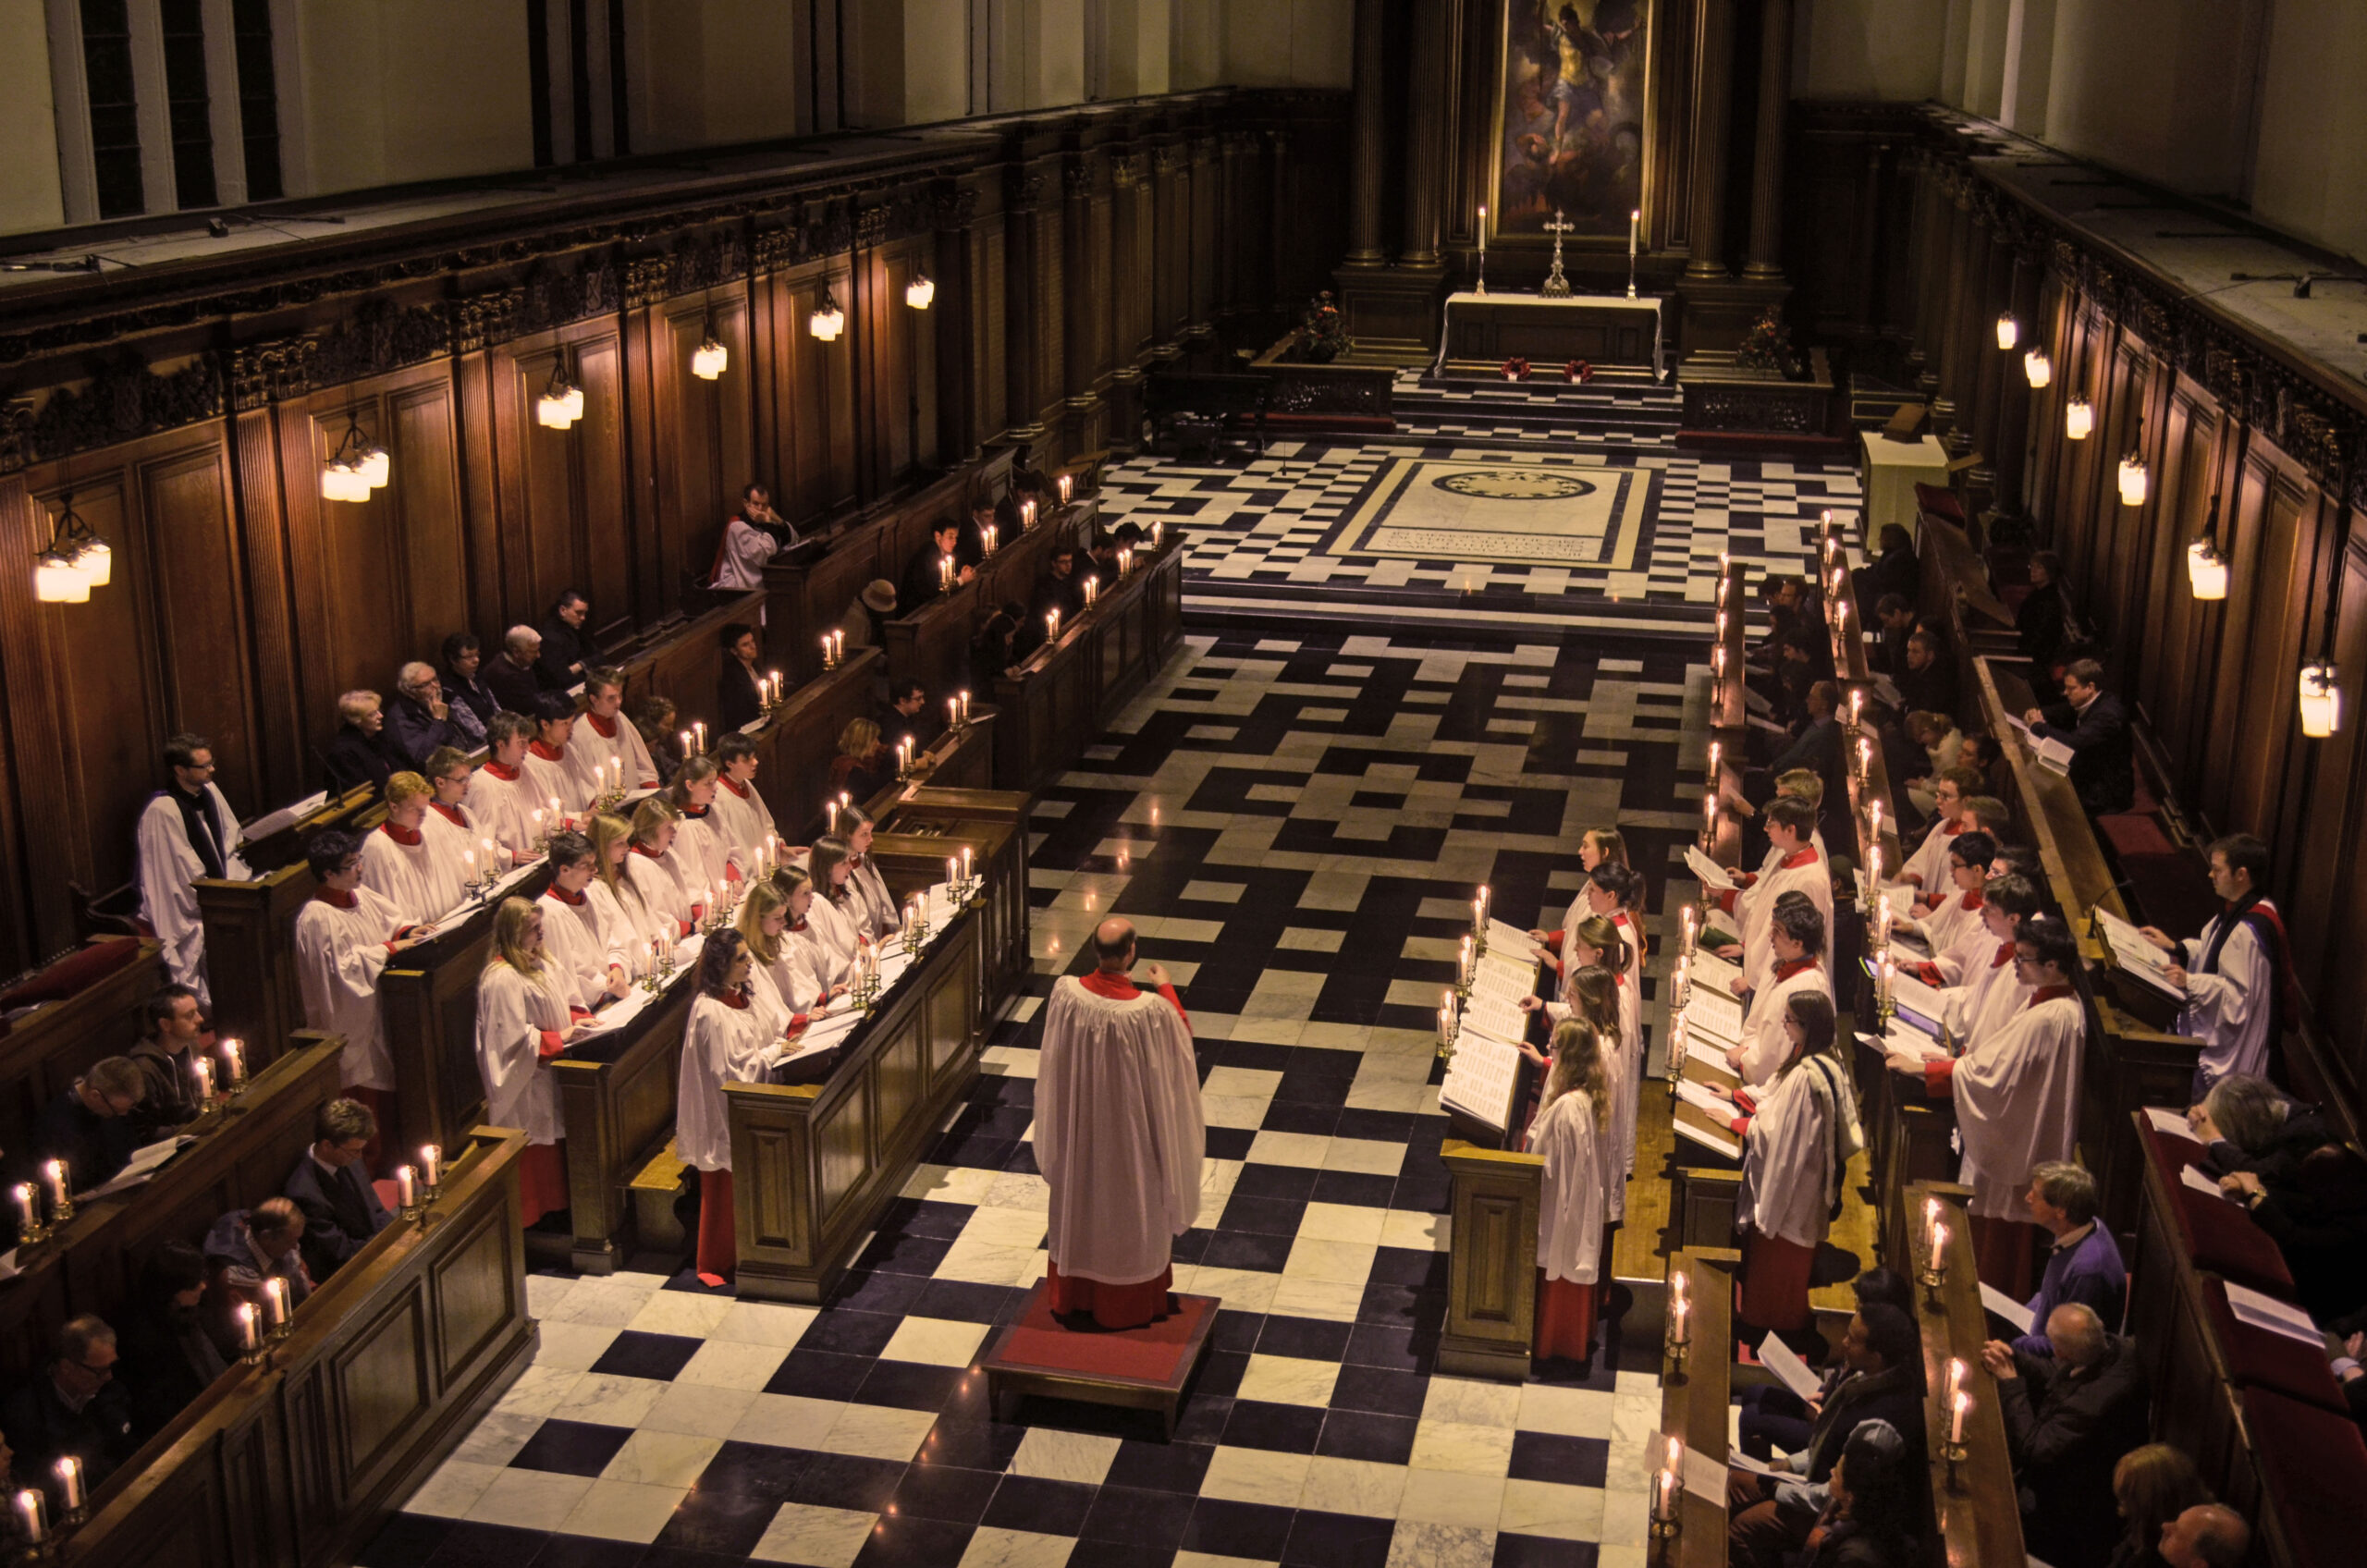 The Choir of Trinity College Cambridge sings Evensong in Chapel